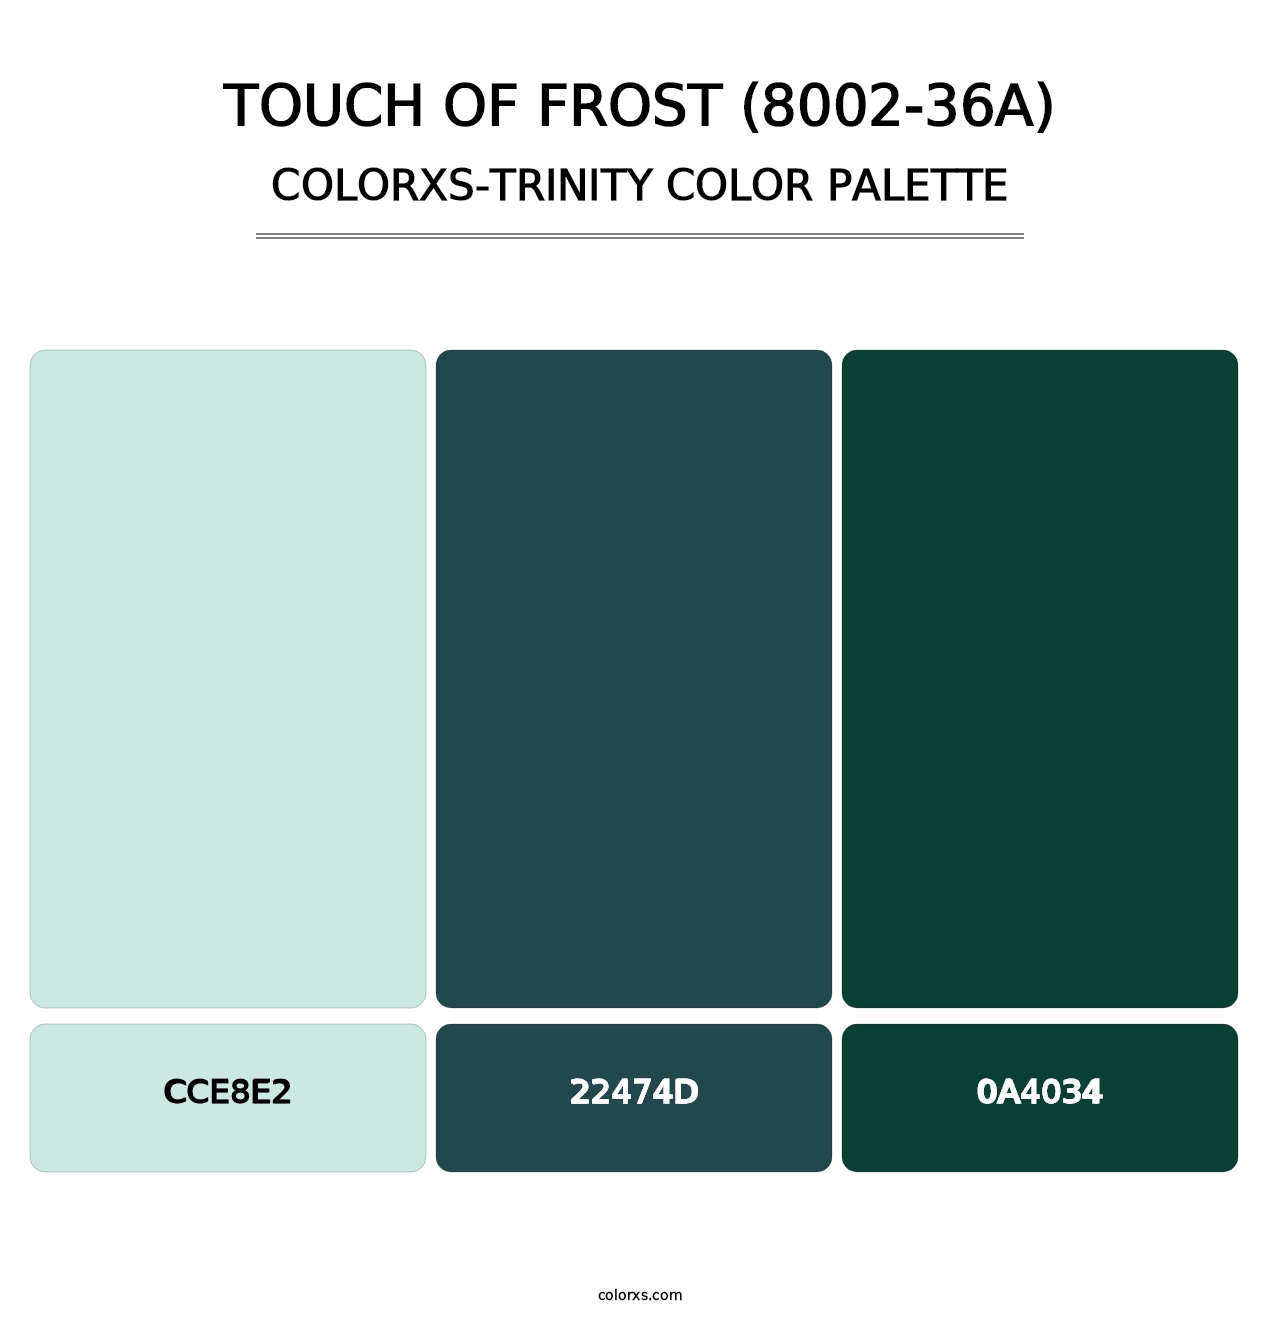 Touch of Frost (8002-36A) - Colorxs Trinity Palette